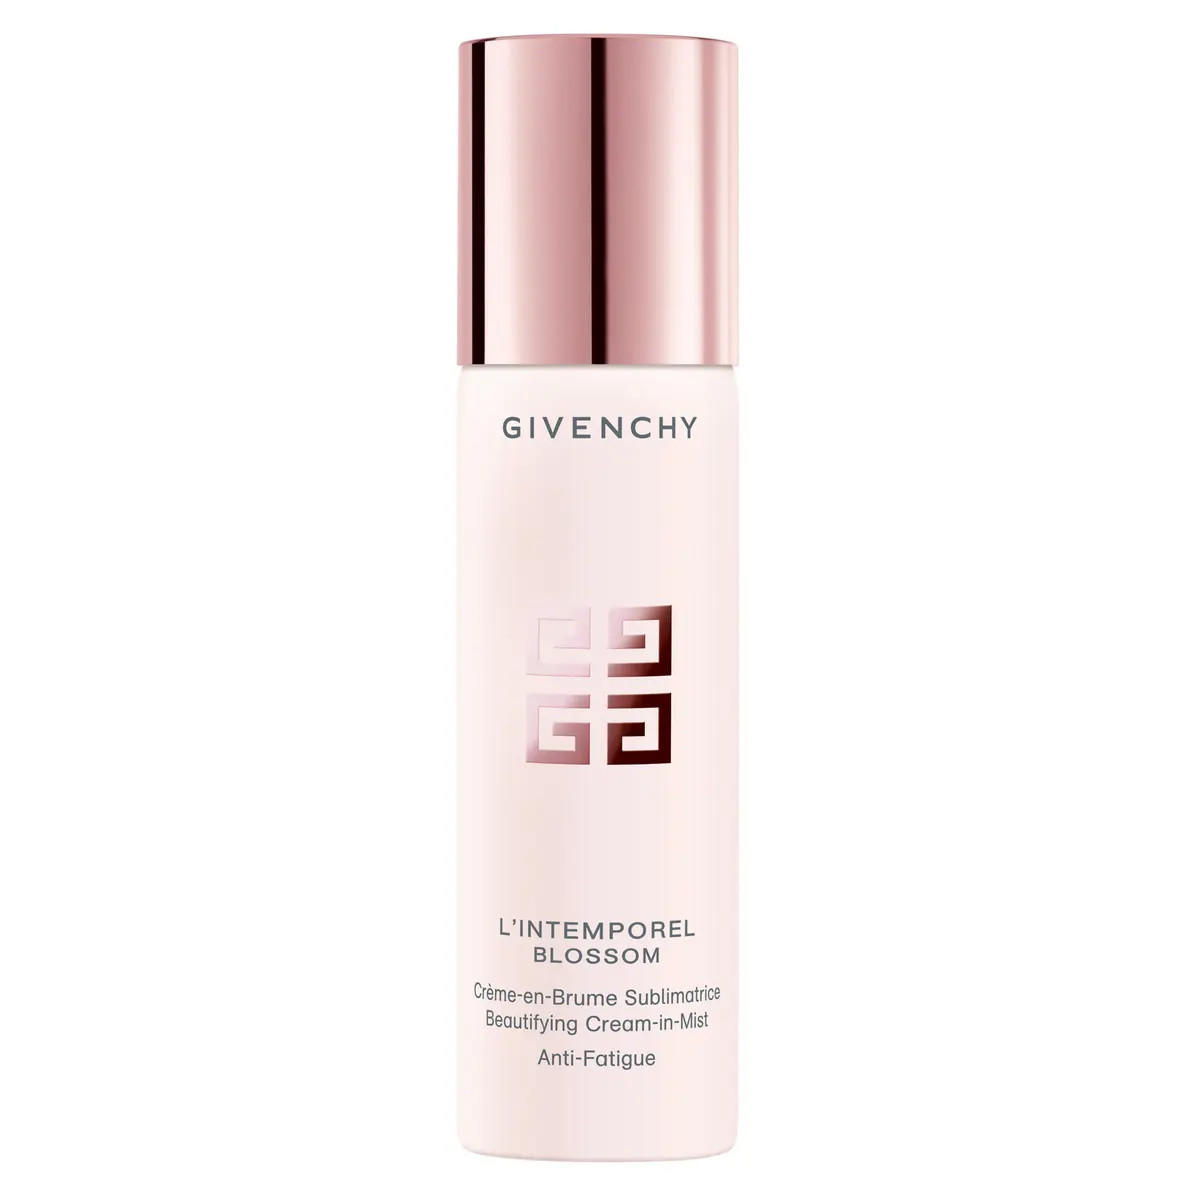 Givenchy L'Intemporel Blossom Beautifying Cream-In-Mist